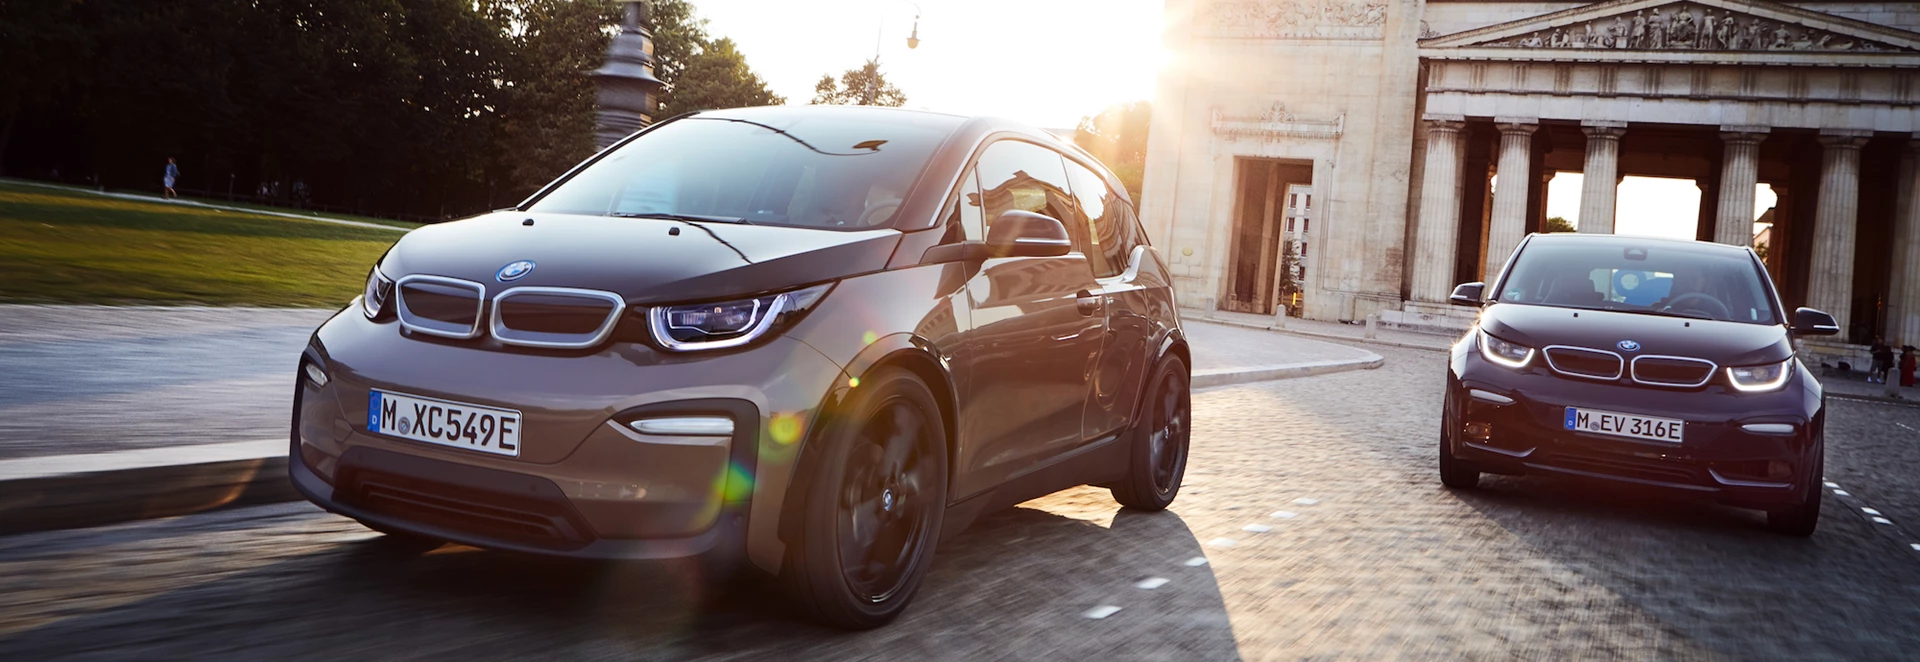 BMW i3 updated with improved range and trim options 